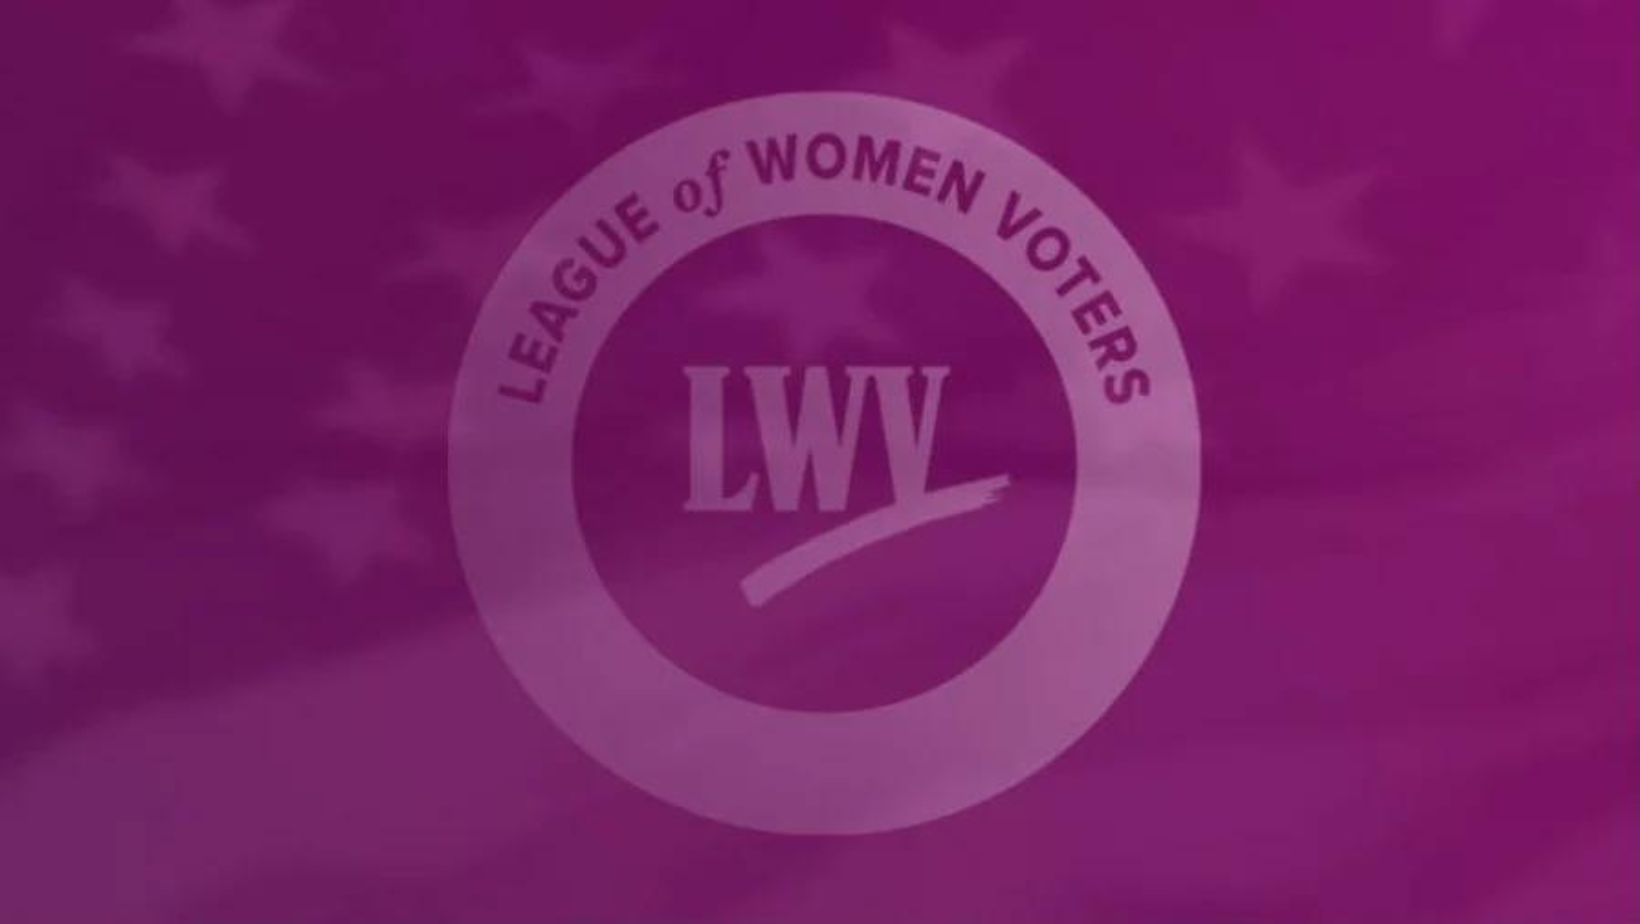 LWV logo in a circle with purple overlay and flag in background